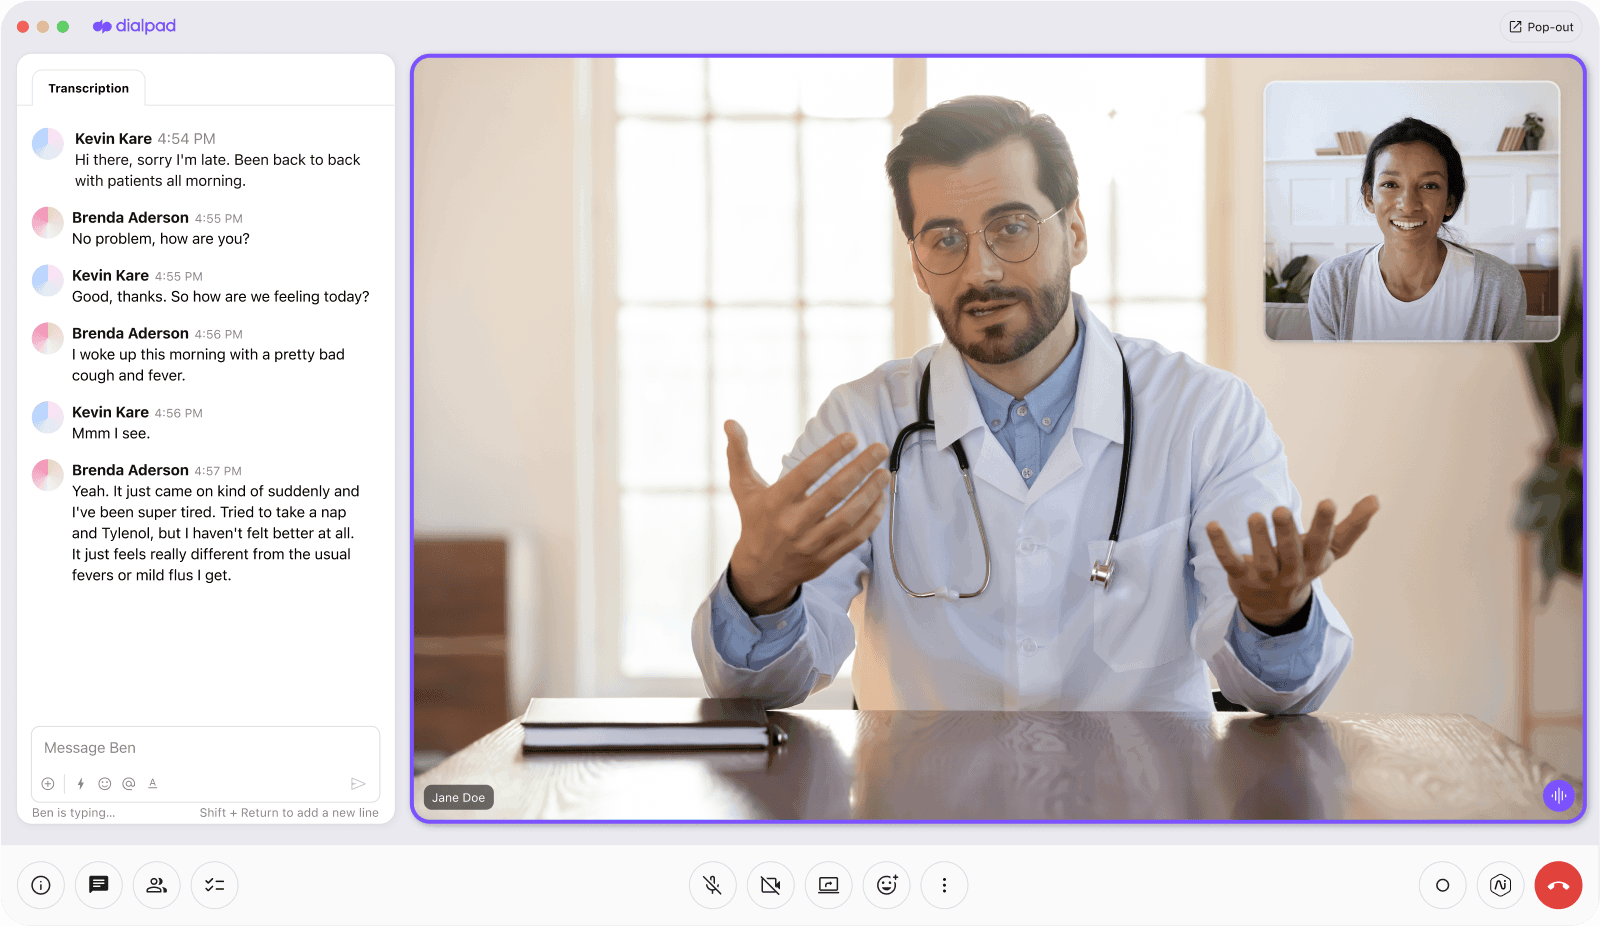 Meeting transcription on a healthcare video call